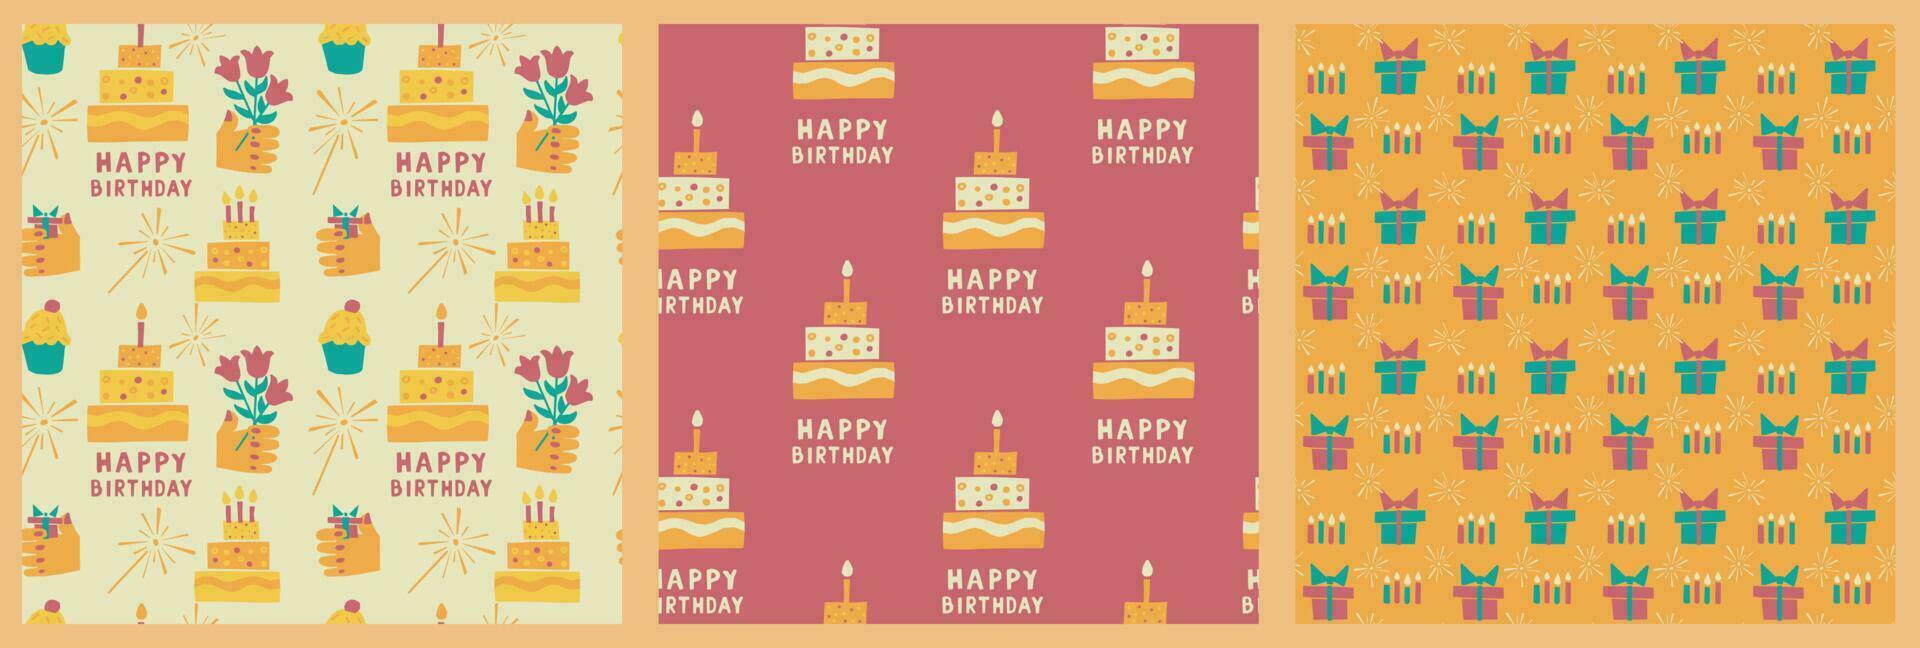 Set of three seamless pattern with hand drawn cutout elements related to birthday party and text Happy birthday in pastel papercraft flat style. Suitable for textile, wallpaper, wrapping, background vector